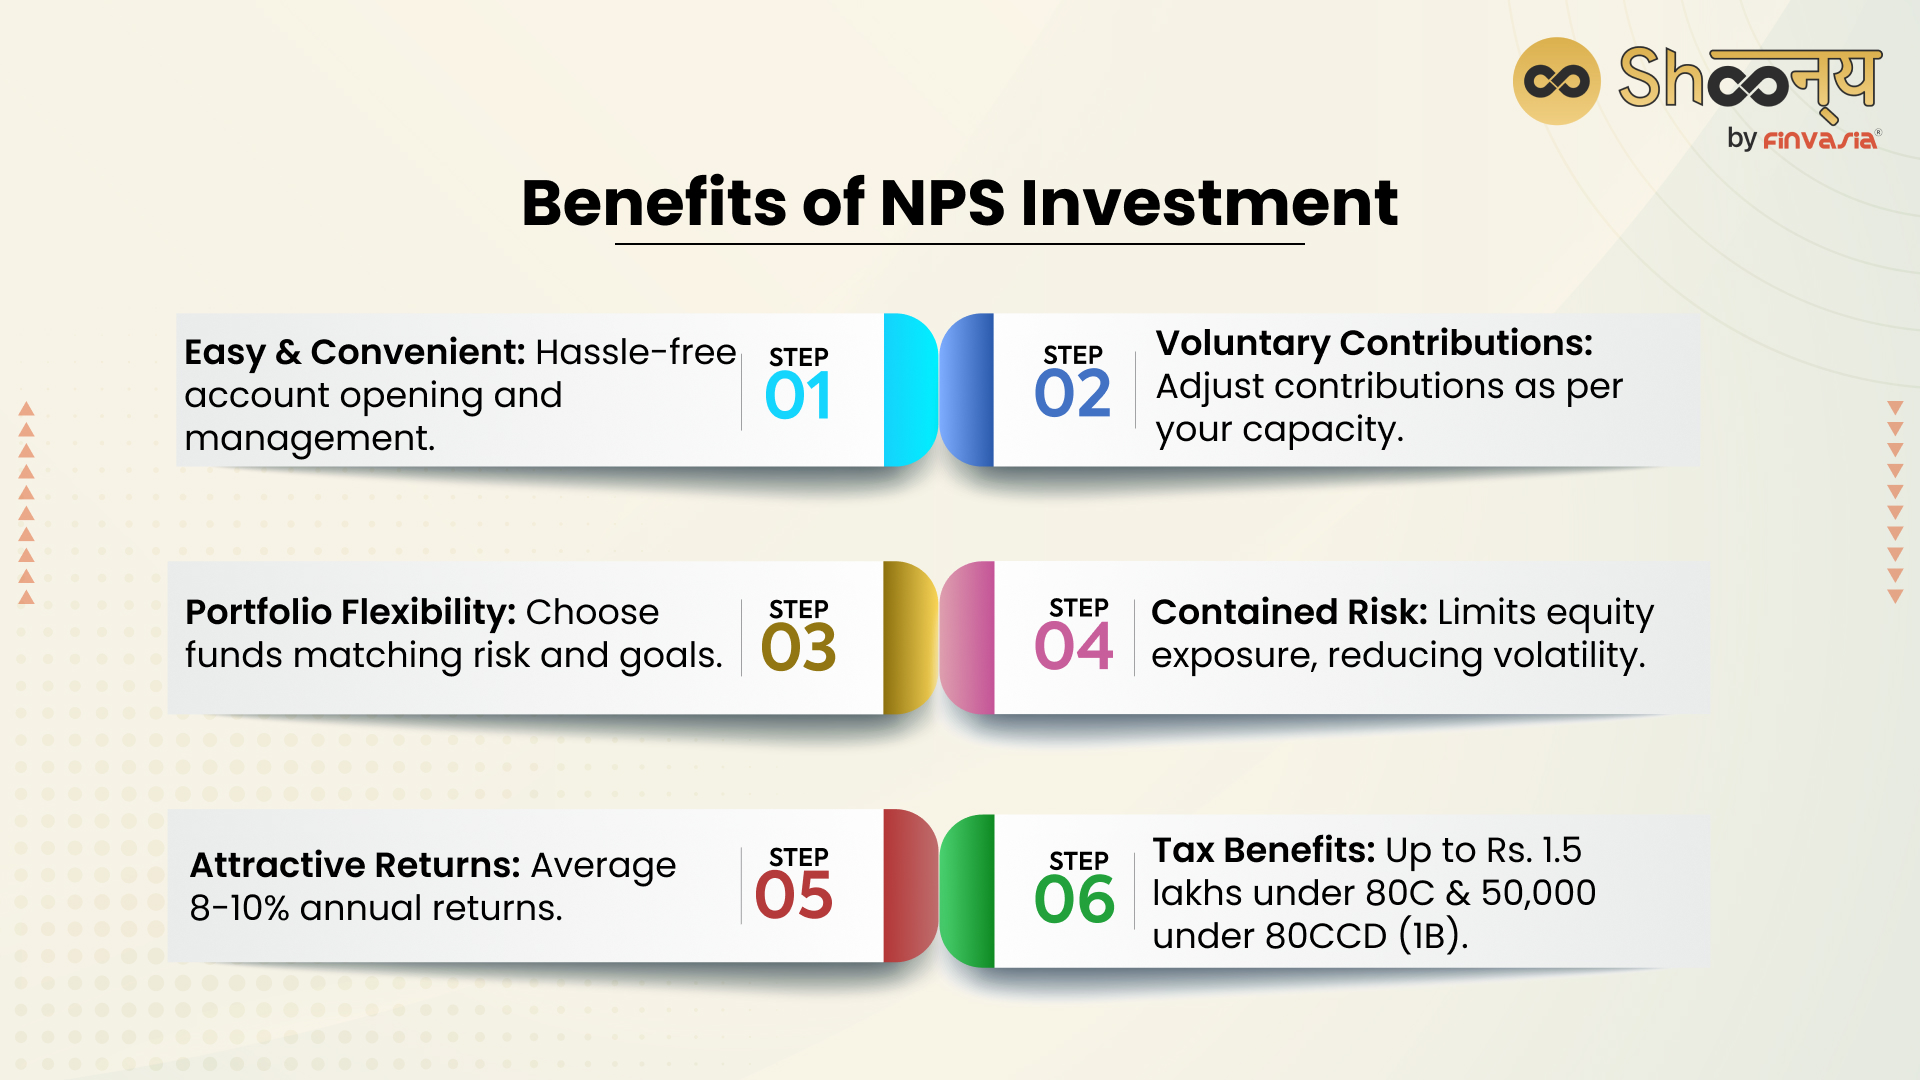 Benefits of NPS Investment